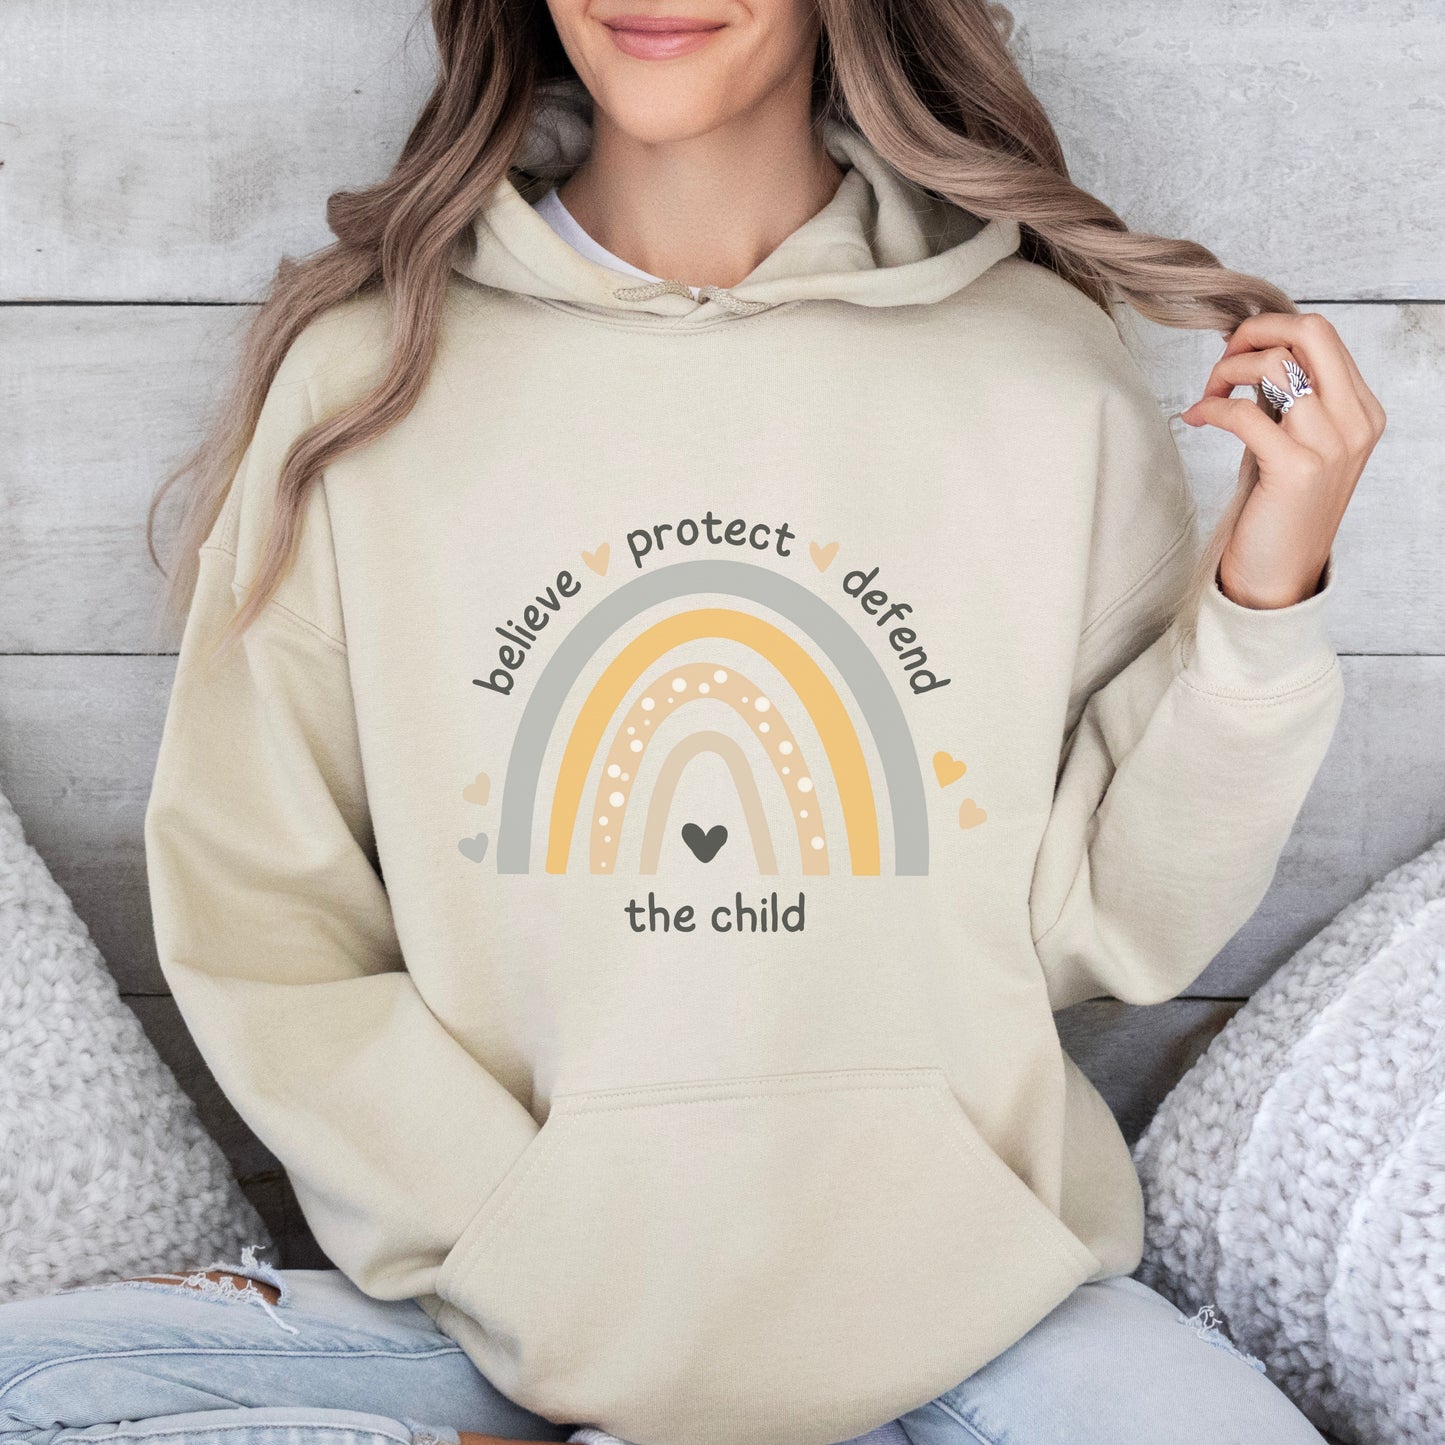  The front of the sweatshirt proudly displays a boho rainbow with the phrase "Believe Protect Defend The Child” in a whimsical and eye-catching font. A powerful message that underscores the importance of safeguarding children's rights and well-being.